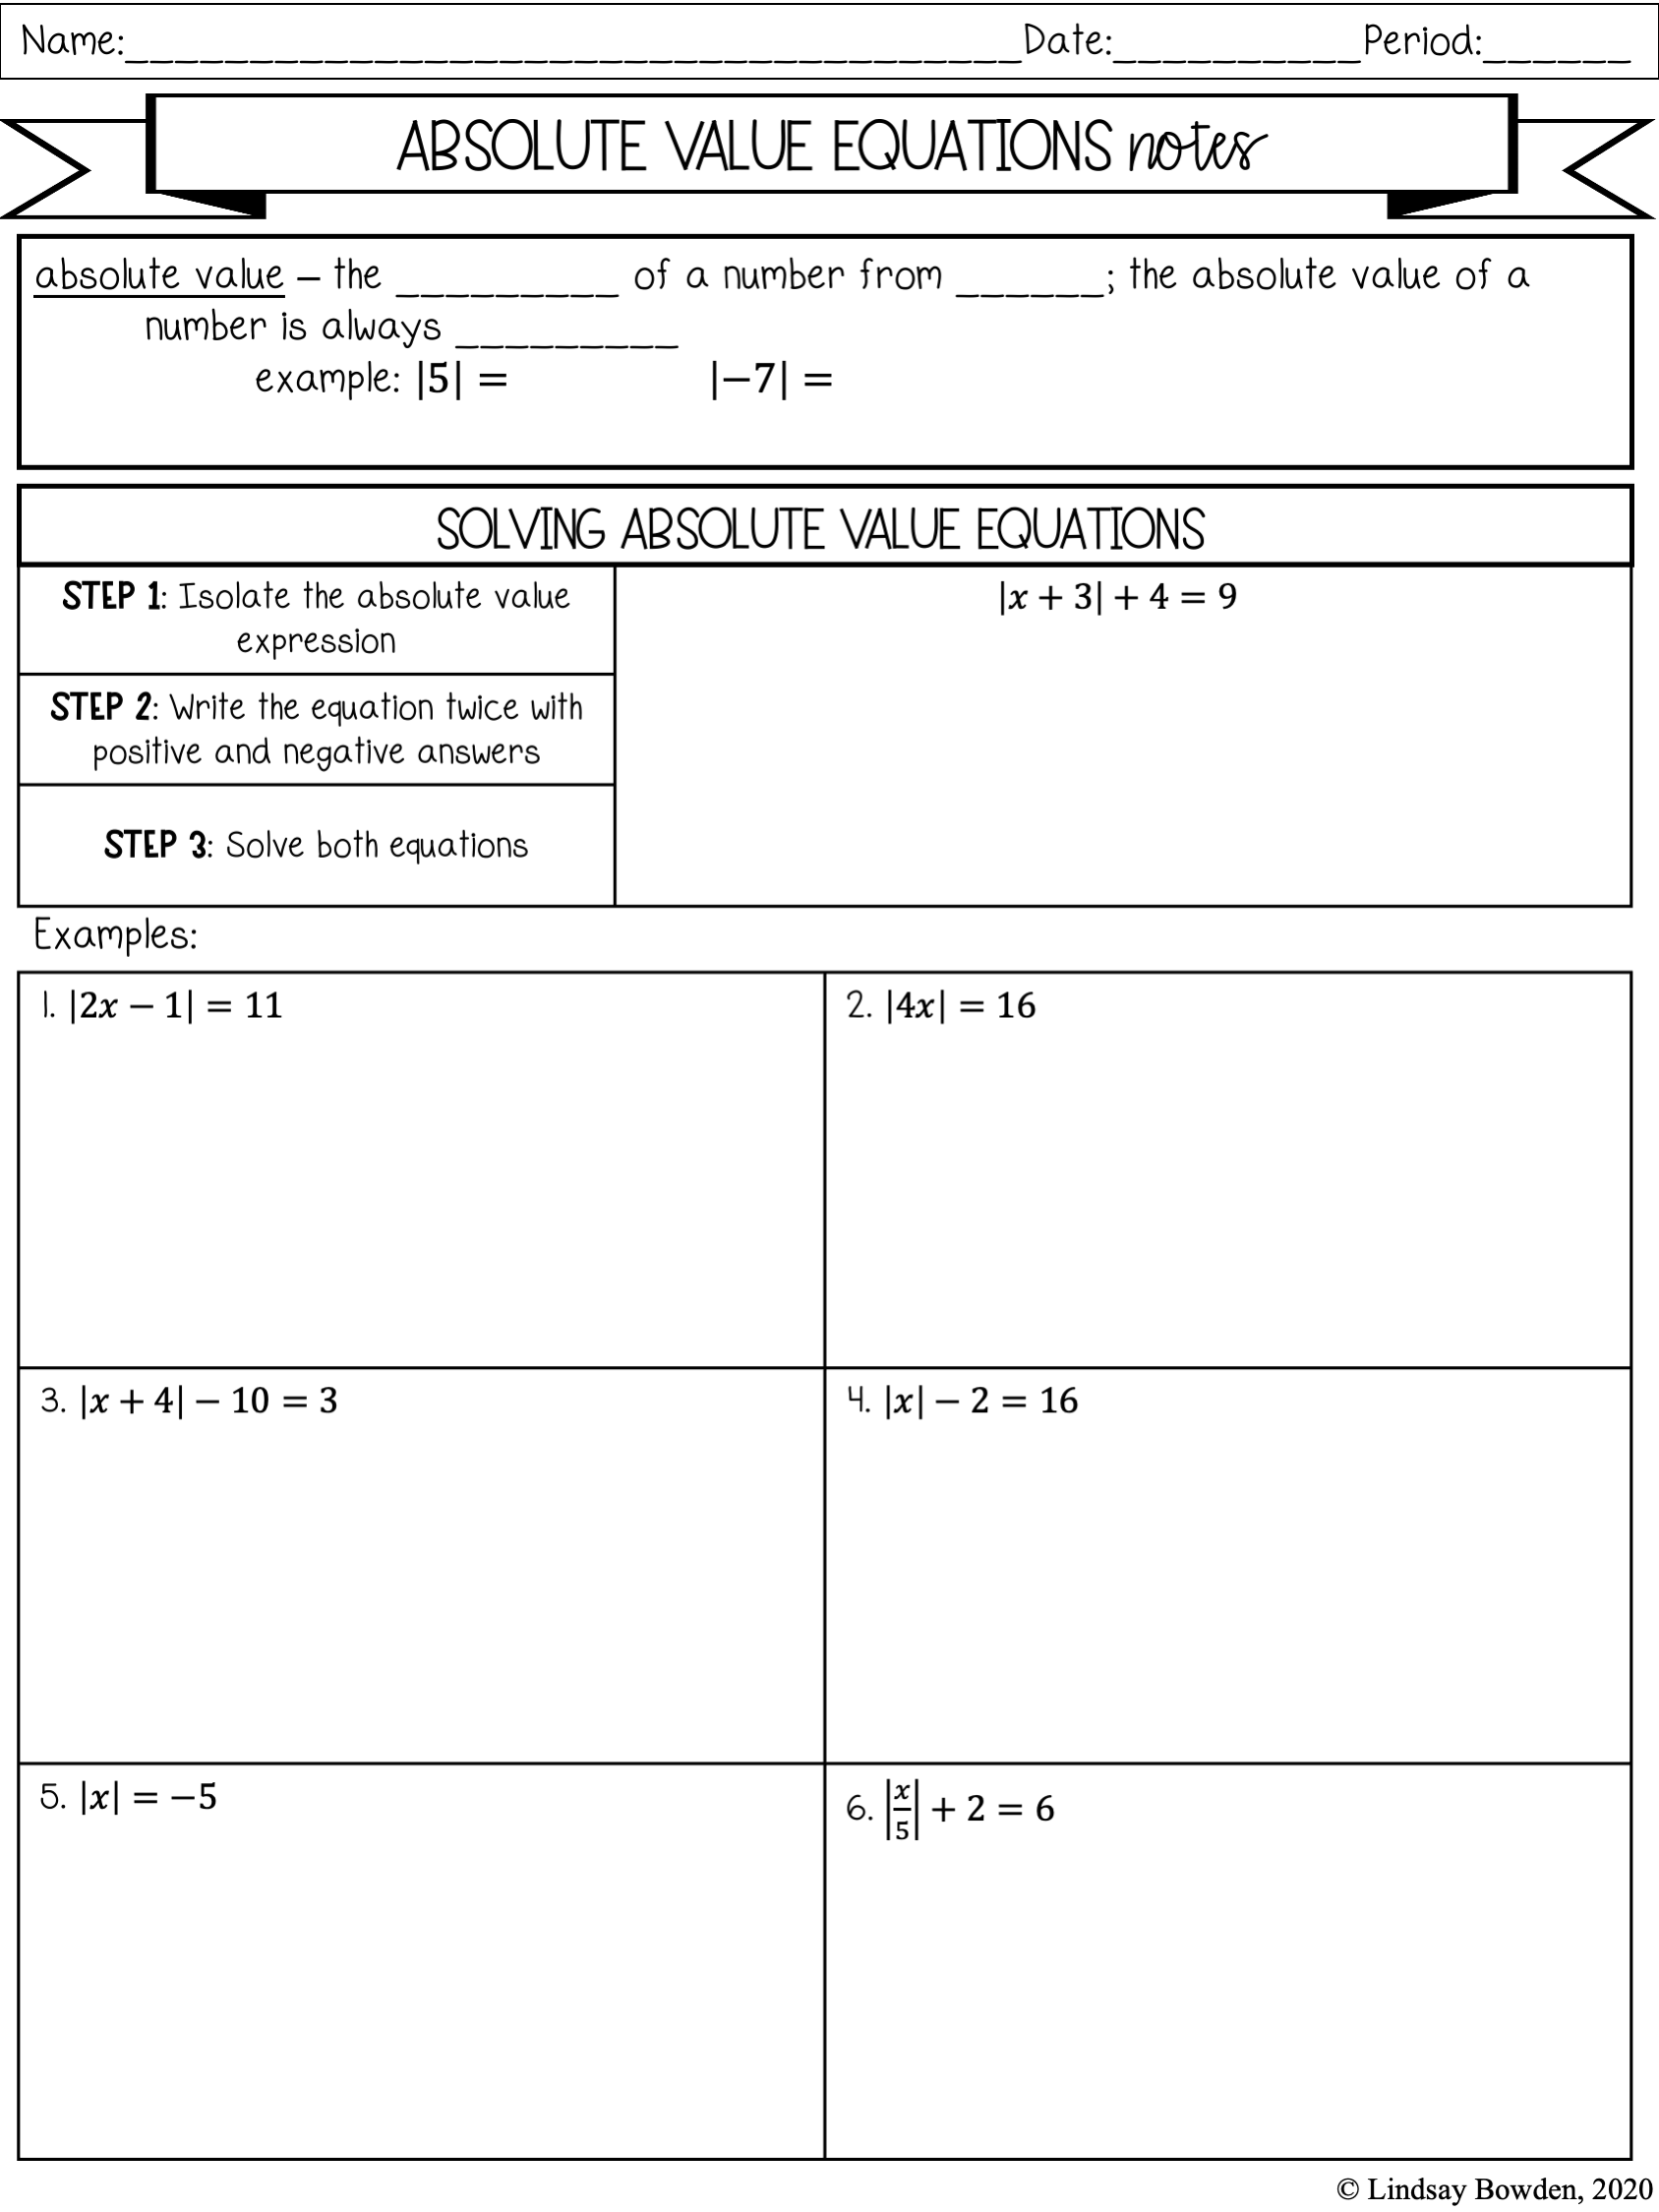 Absolute Value Notes And Worksheets Lindsay Bowden